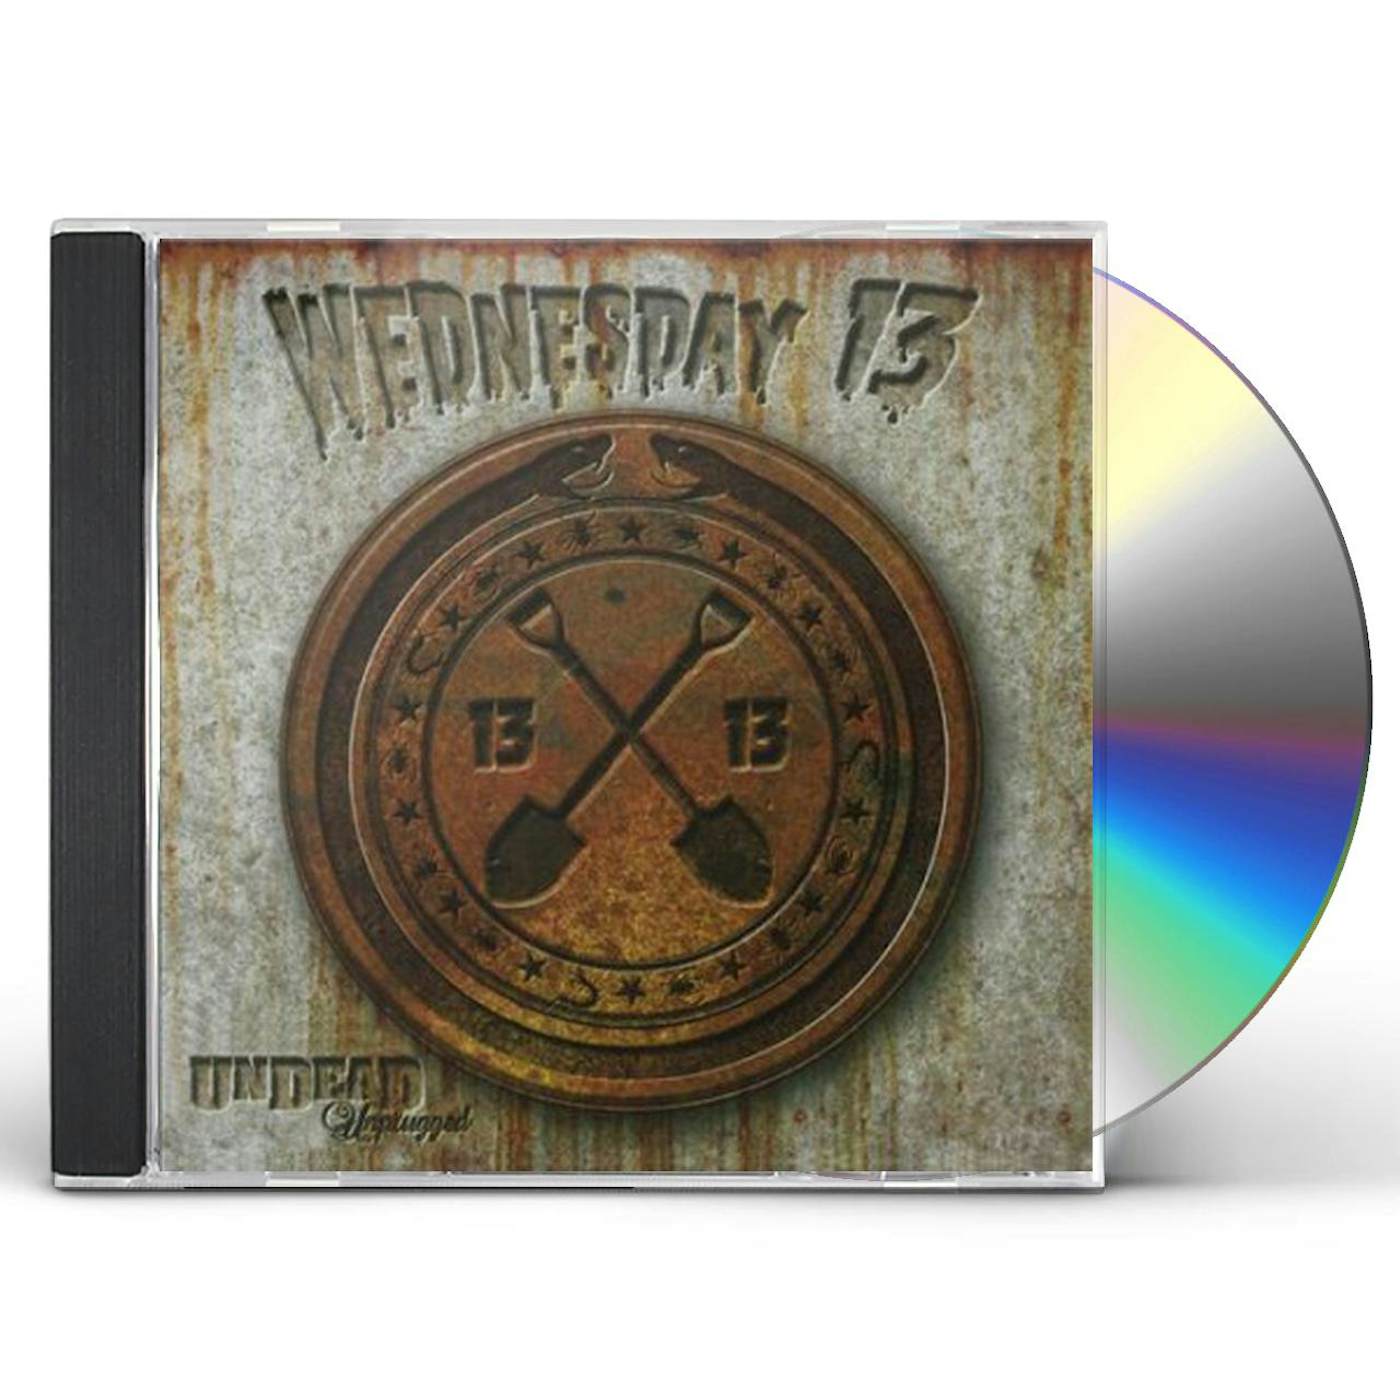 Wednesday 13 UNDEAD UNPLUGGED CD